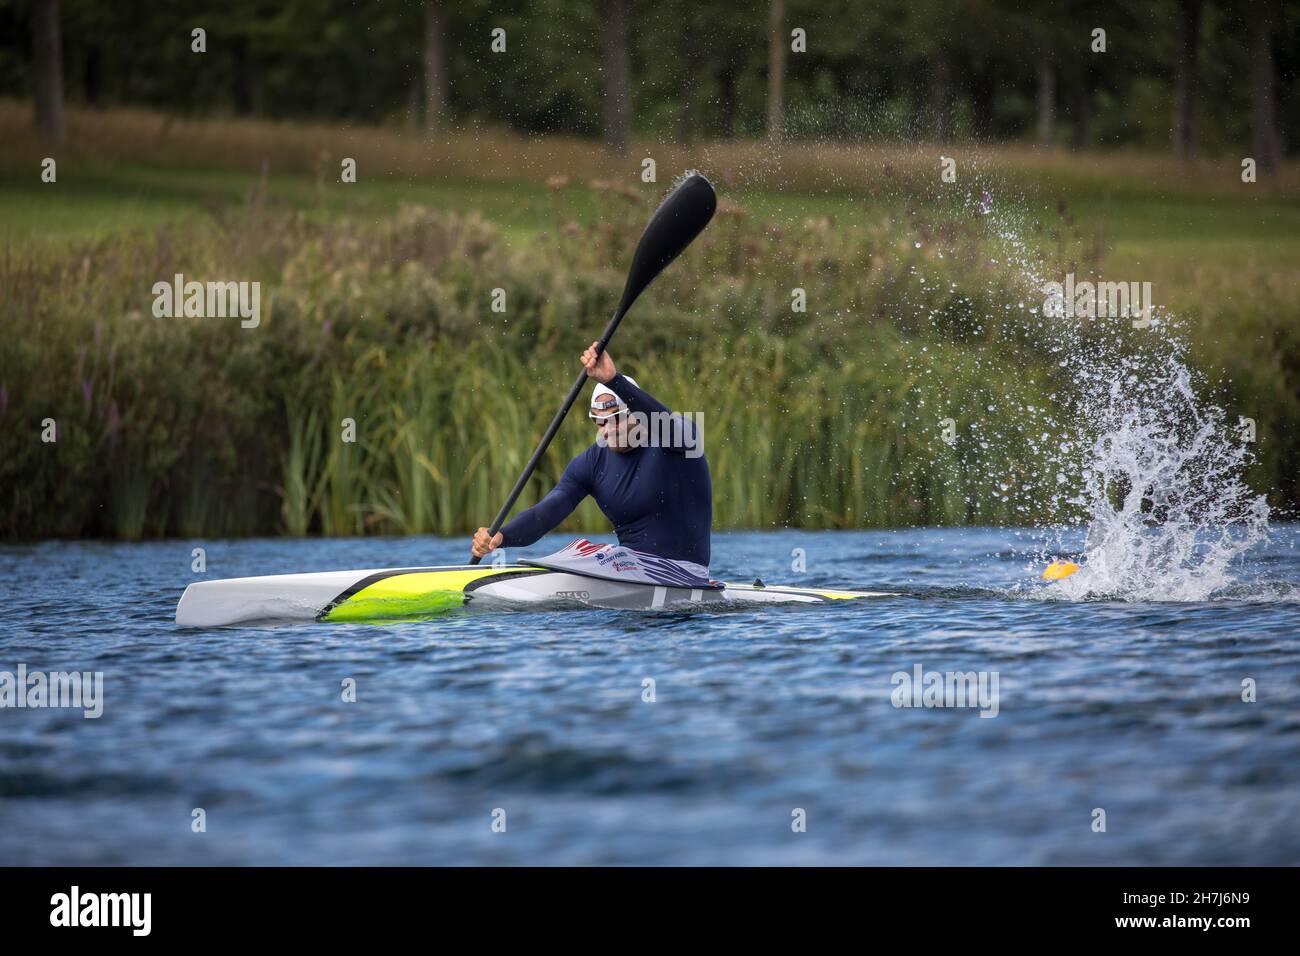 British sprint canoeist and multiple Olympic medalist Liam Heath, MBE, training on the 26th August 2020 at Dorney Lake in the United Kingdom. Liam is Stock Photo